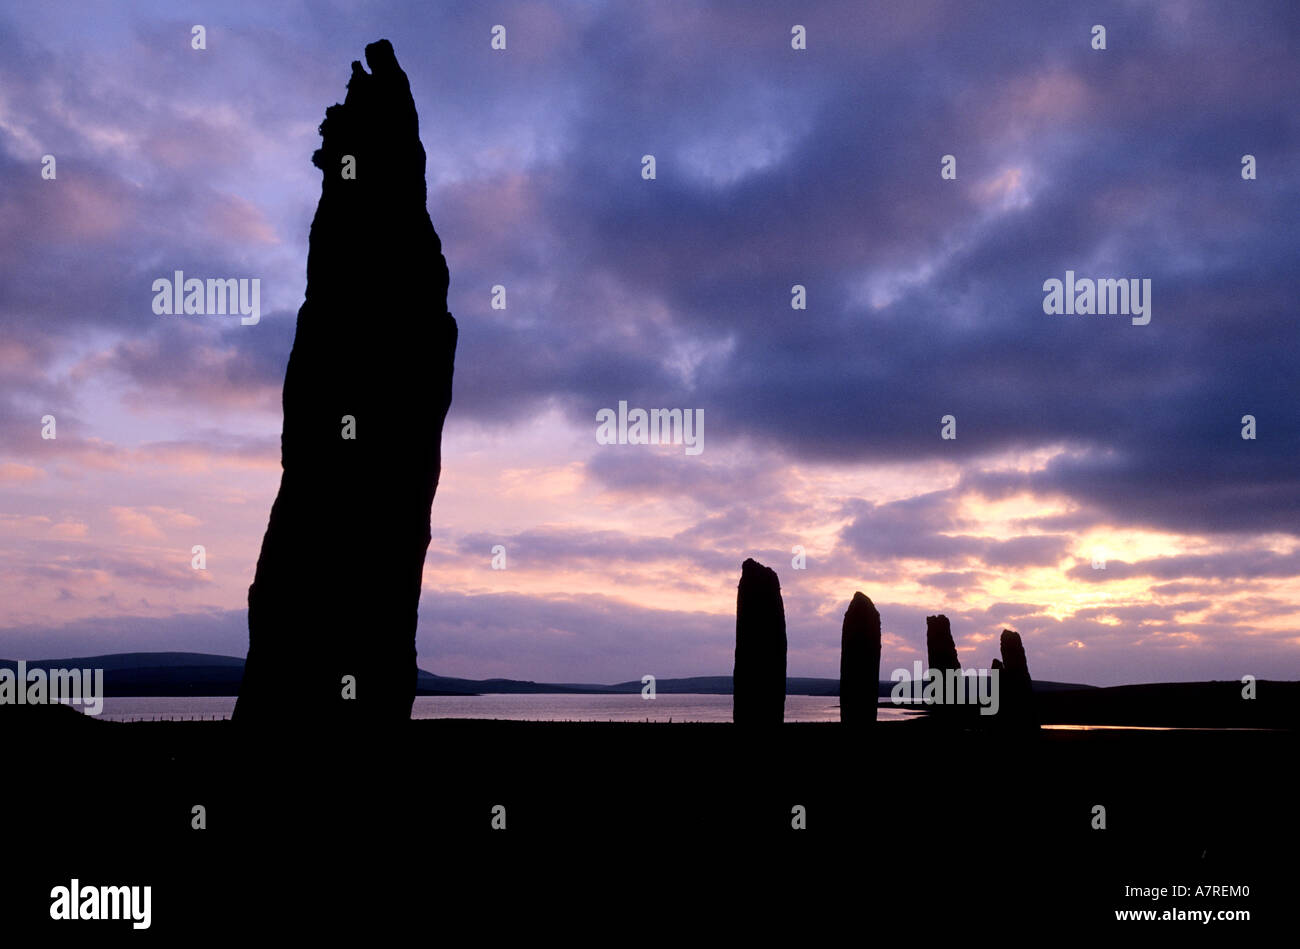 United Kingdom, Scotland, Orkney Islands, Mainland, beside the Loch of Stenness, standing stones from the Ring of Brogar Stock Photo